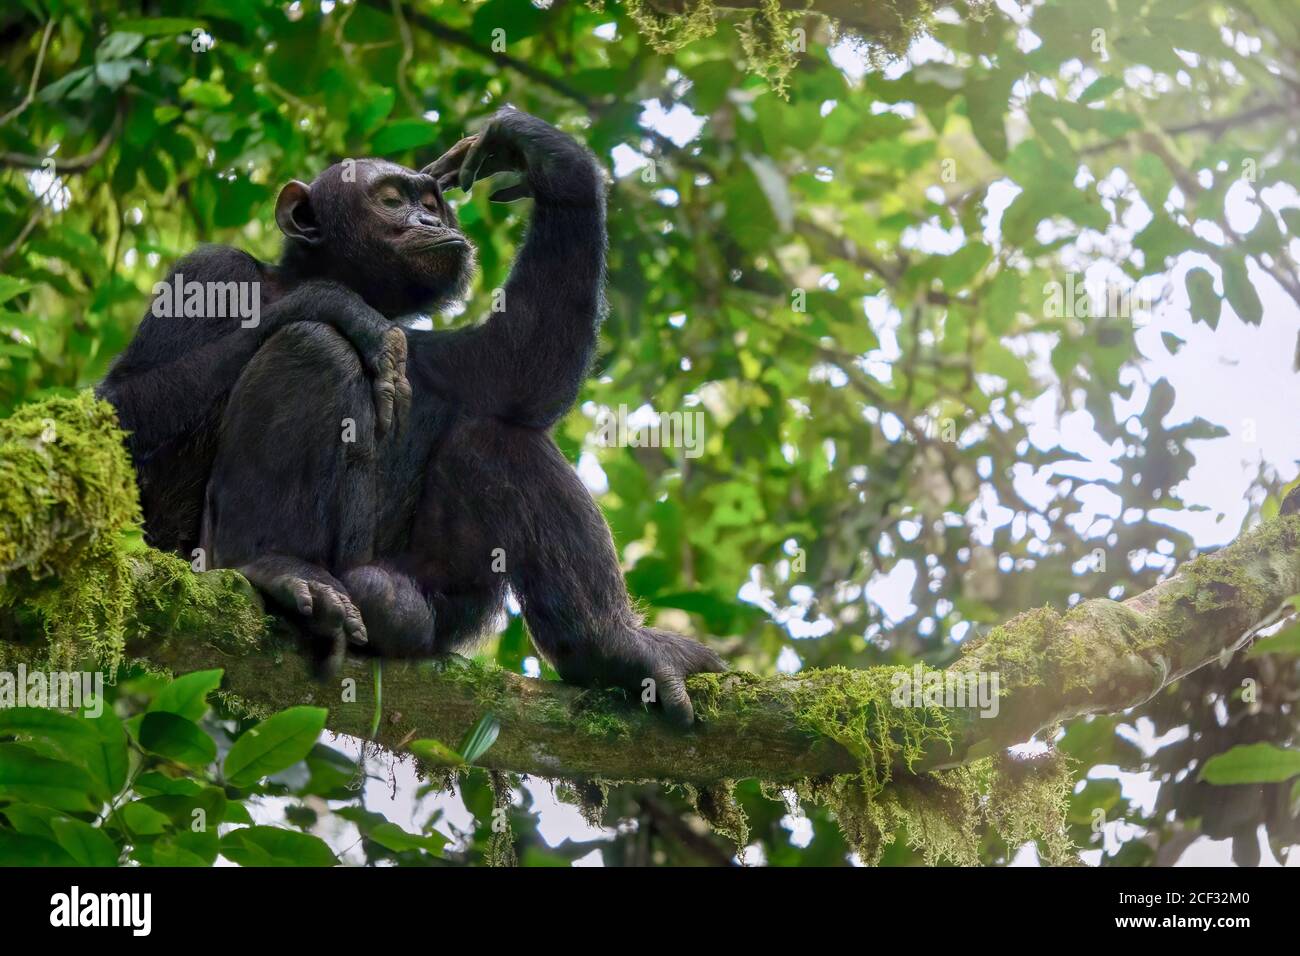 Low angle view of a solitary wild male chimpanzee (Pan troglodytes) sitting on a tree branch in its natural forest habitat in Uganda. Stock Photo